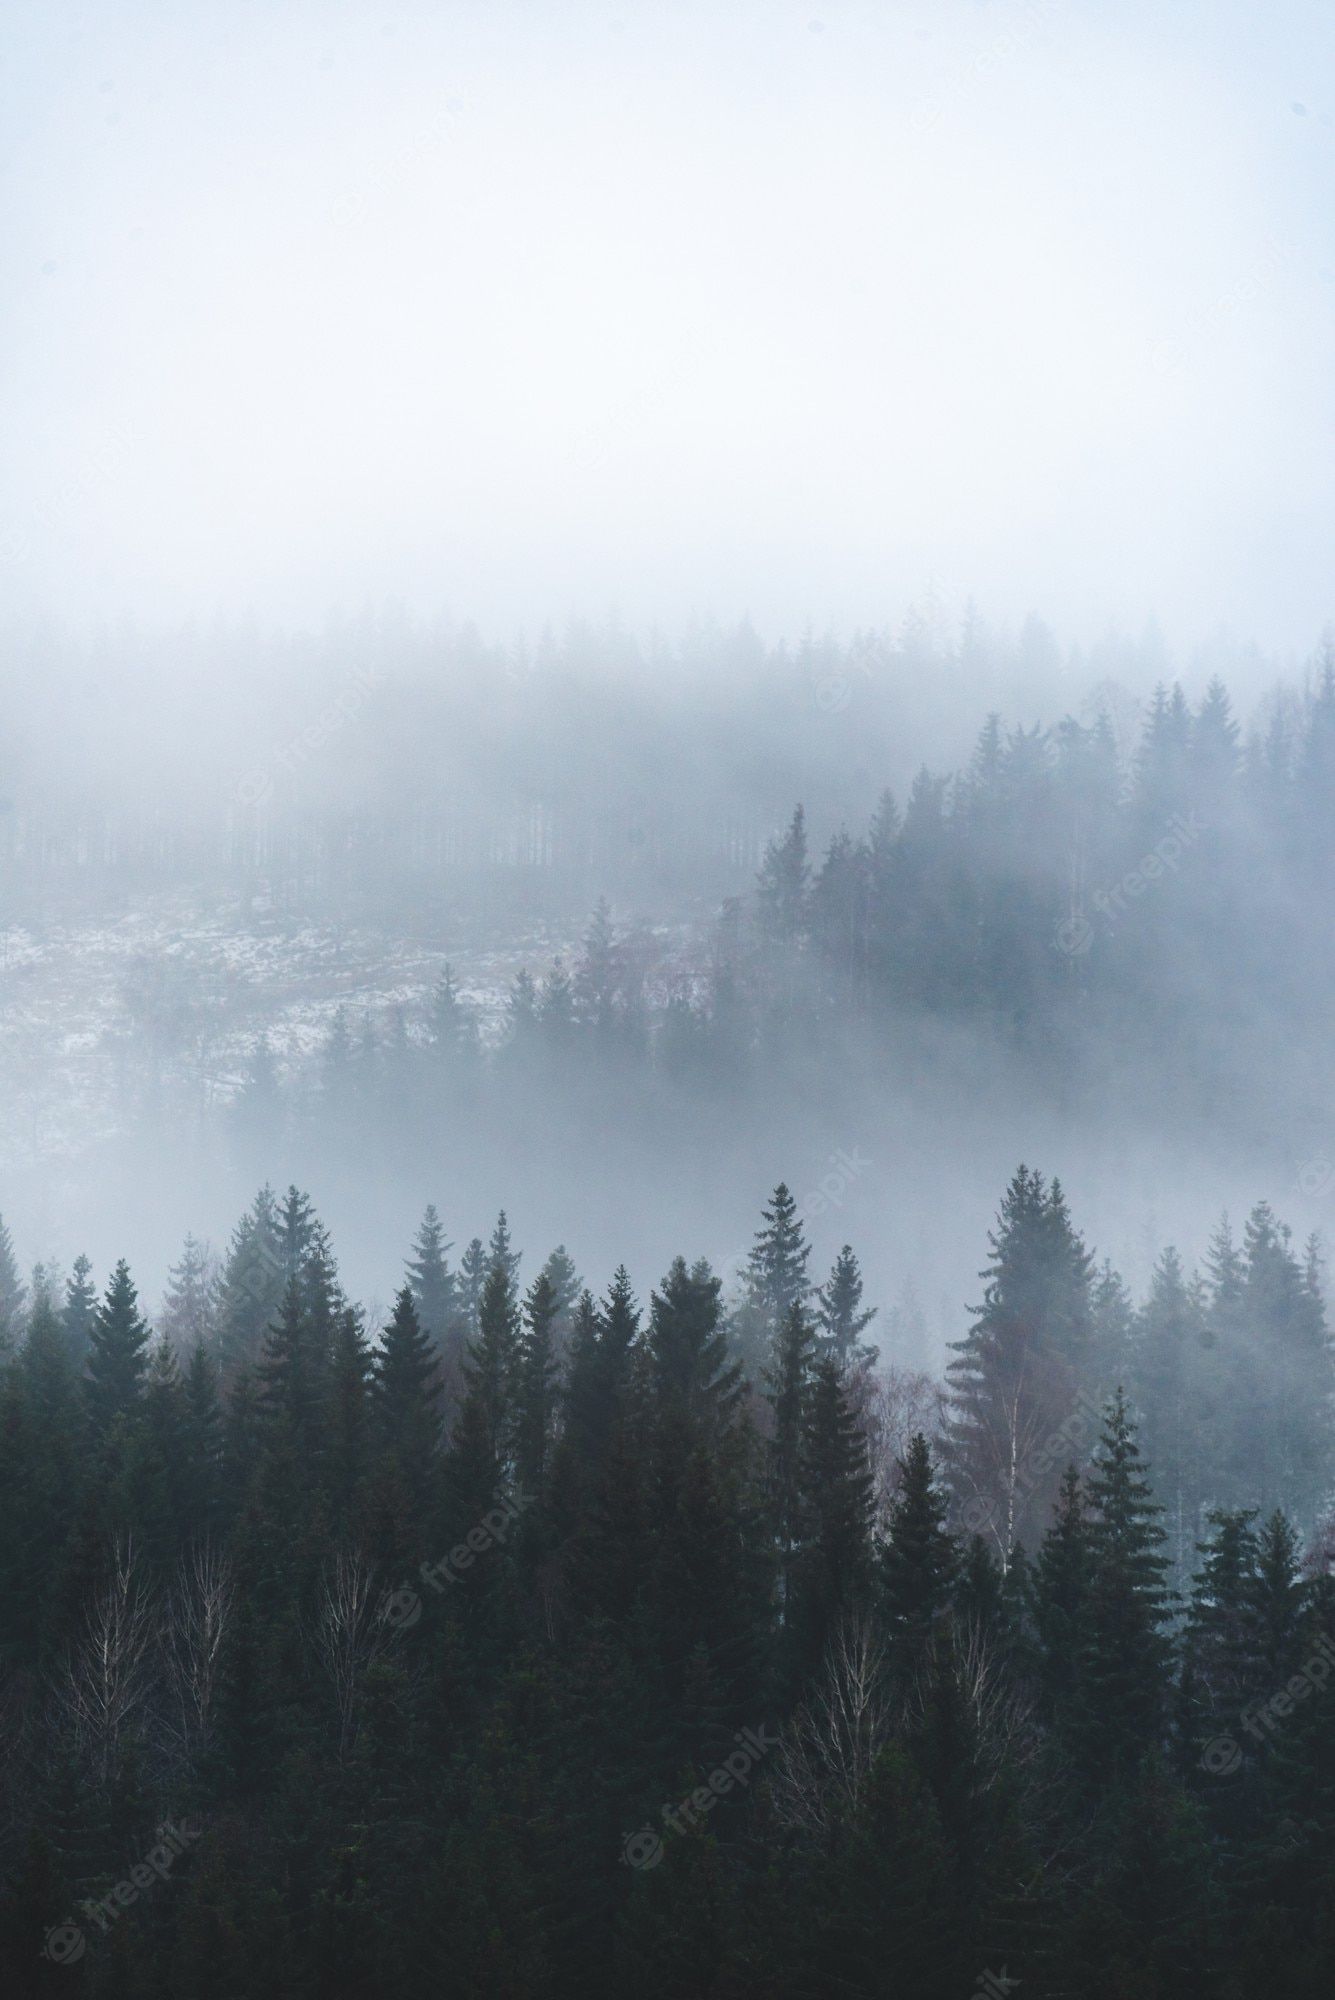 Foggy Forest Image